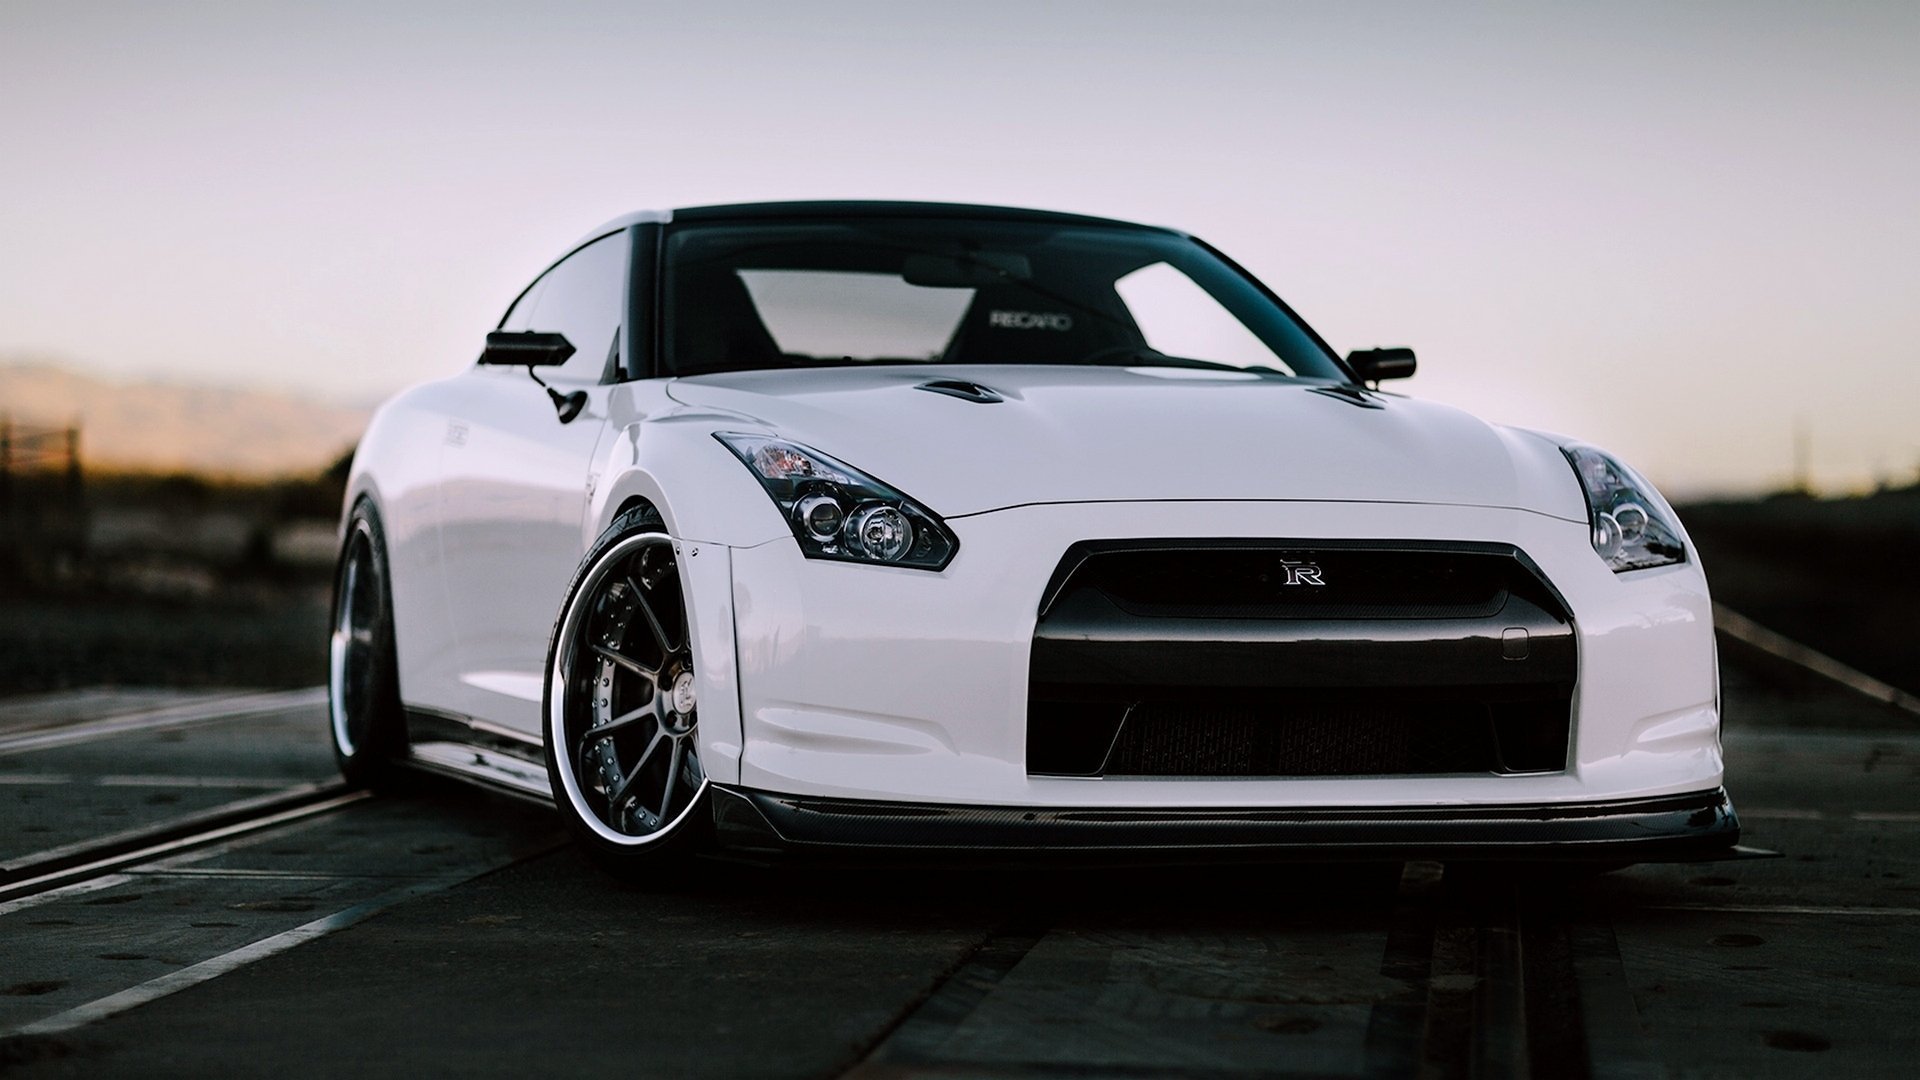 Nissan GT-R Wallpapers Images Photos Pictures Backgrounds